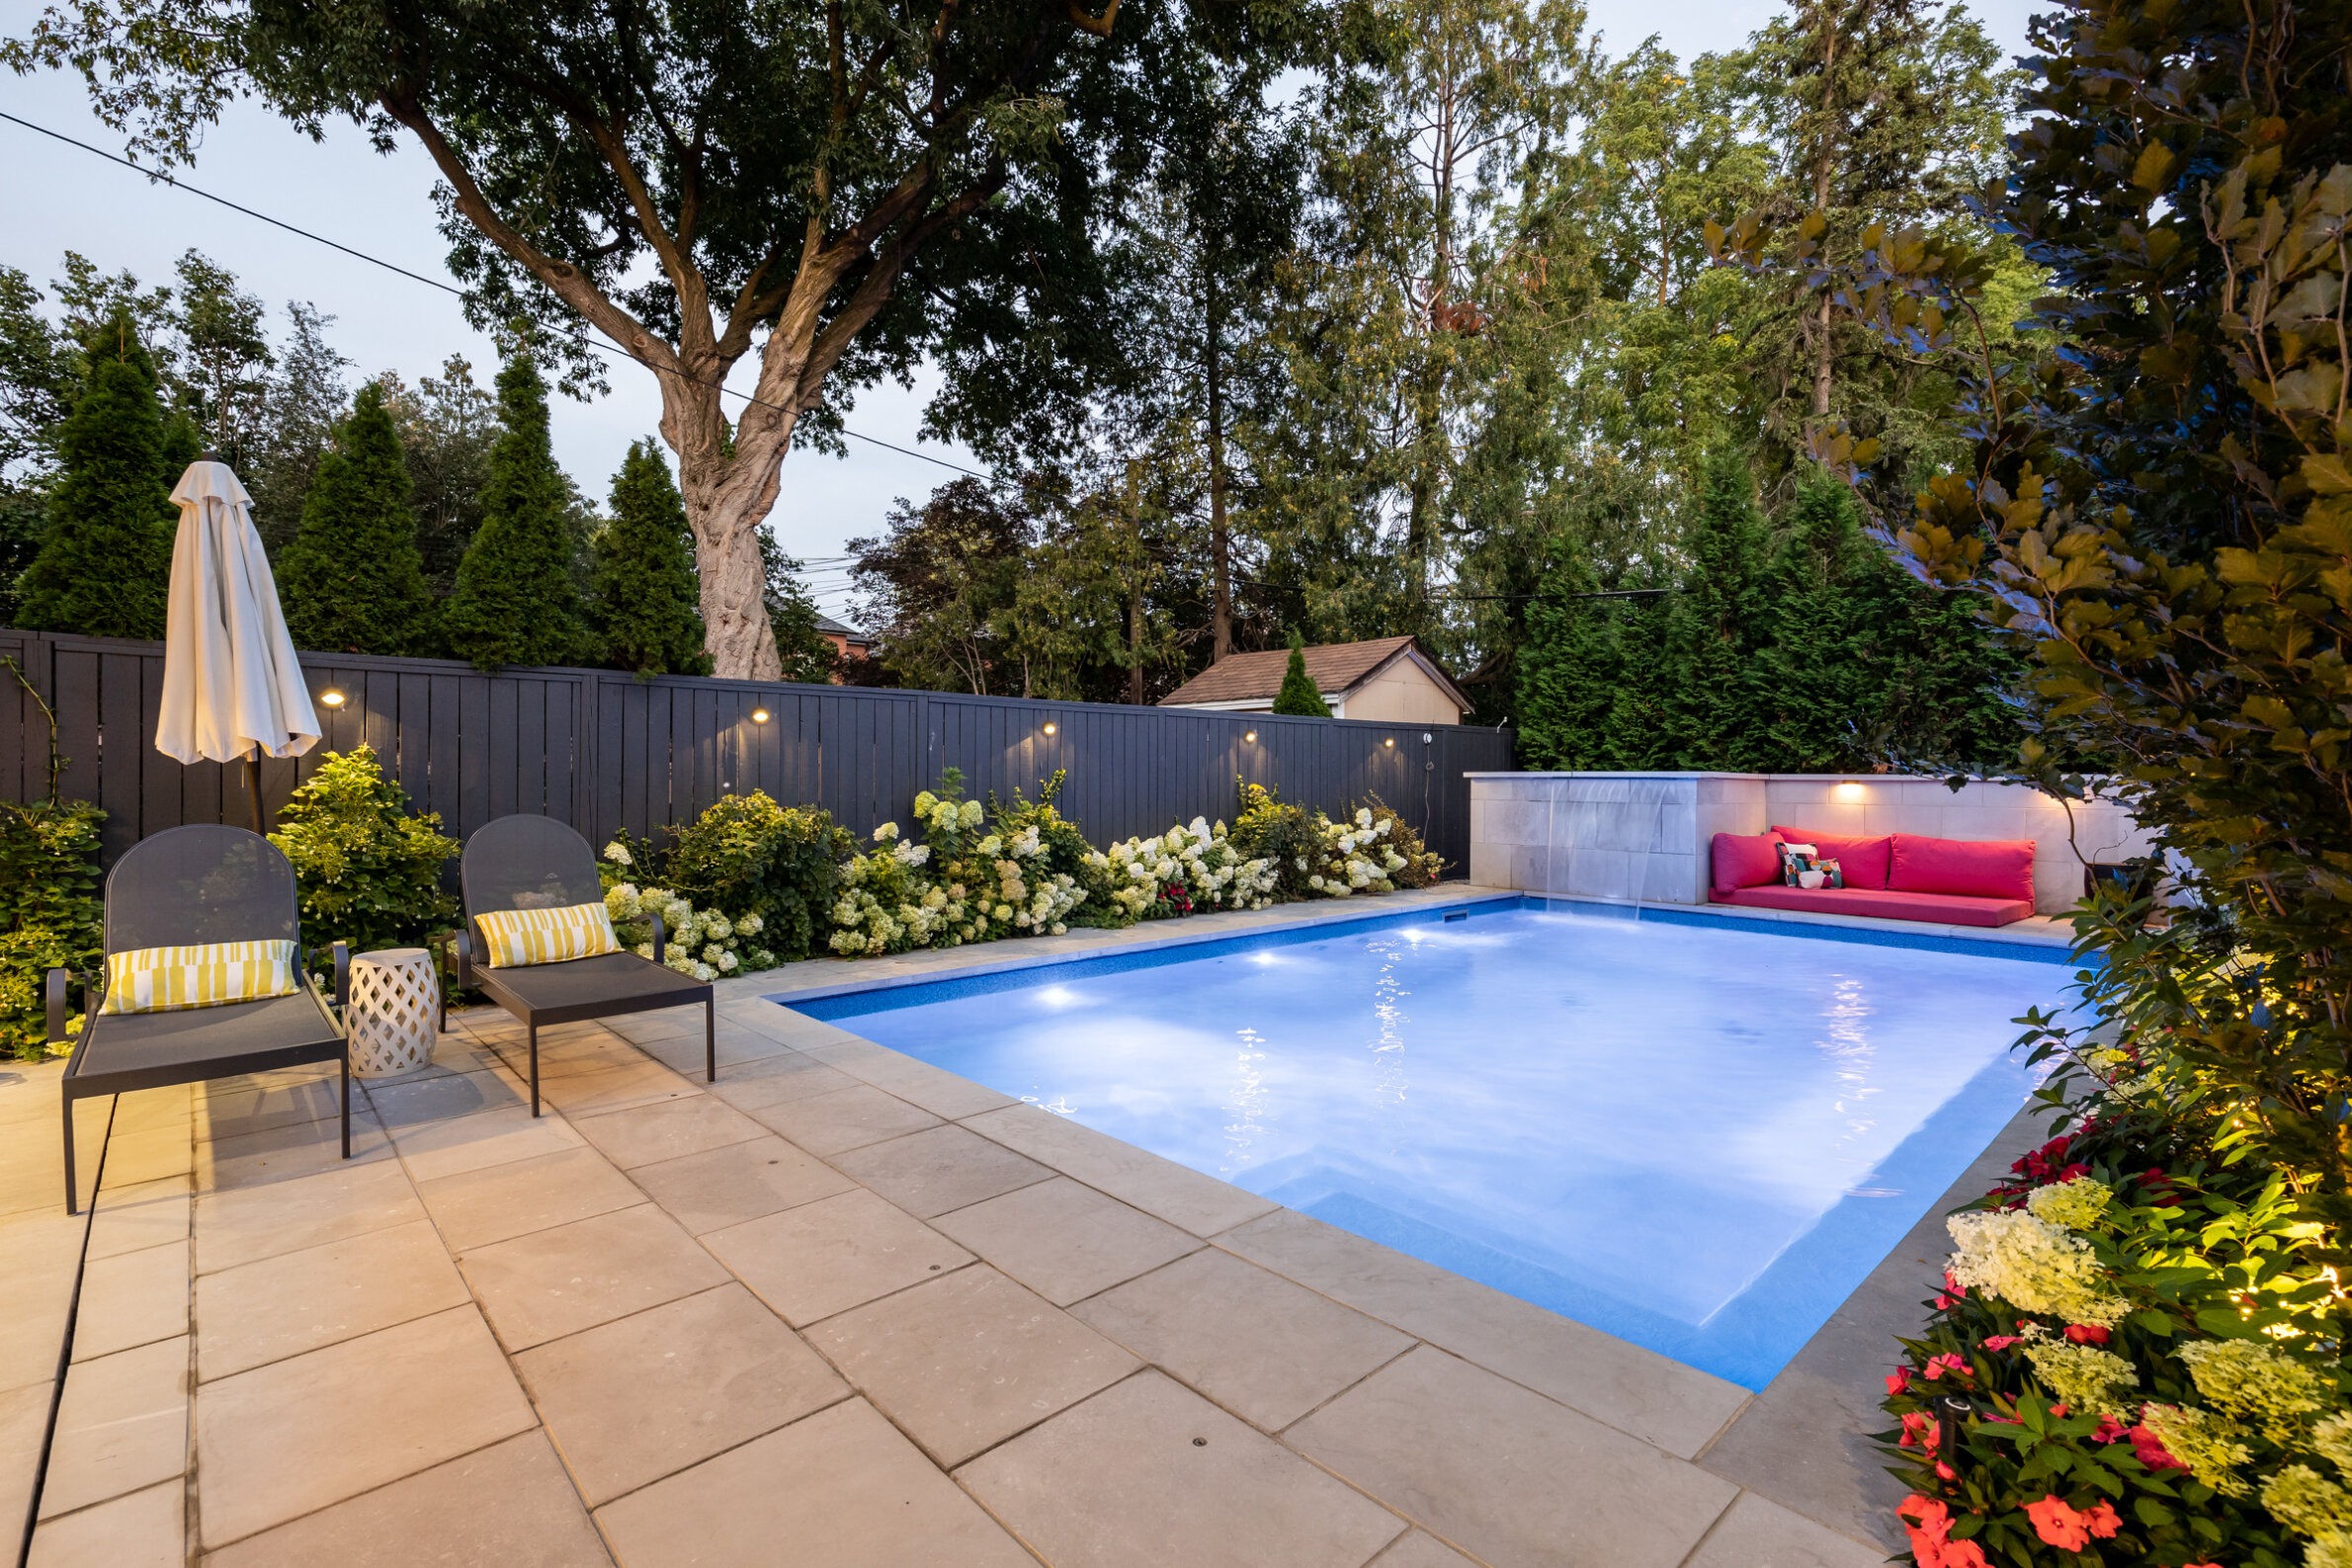 The image depicts a serene, illuminated backyard with an in-ground pool, patio, loungers, flowers, and a seating area under a large tree at dusk.